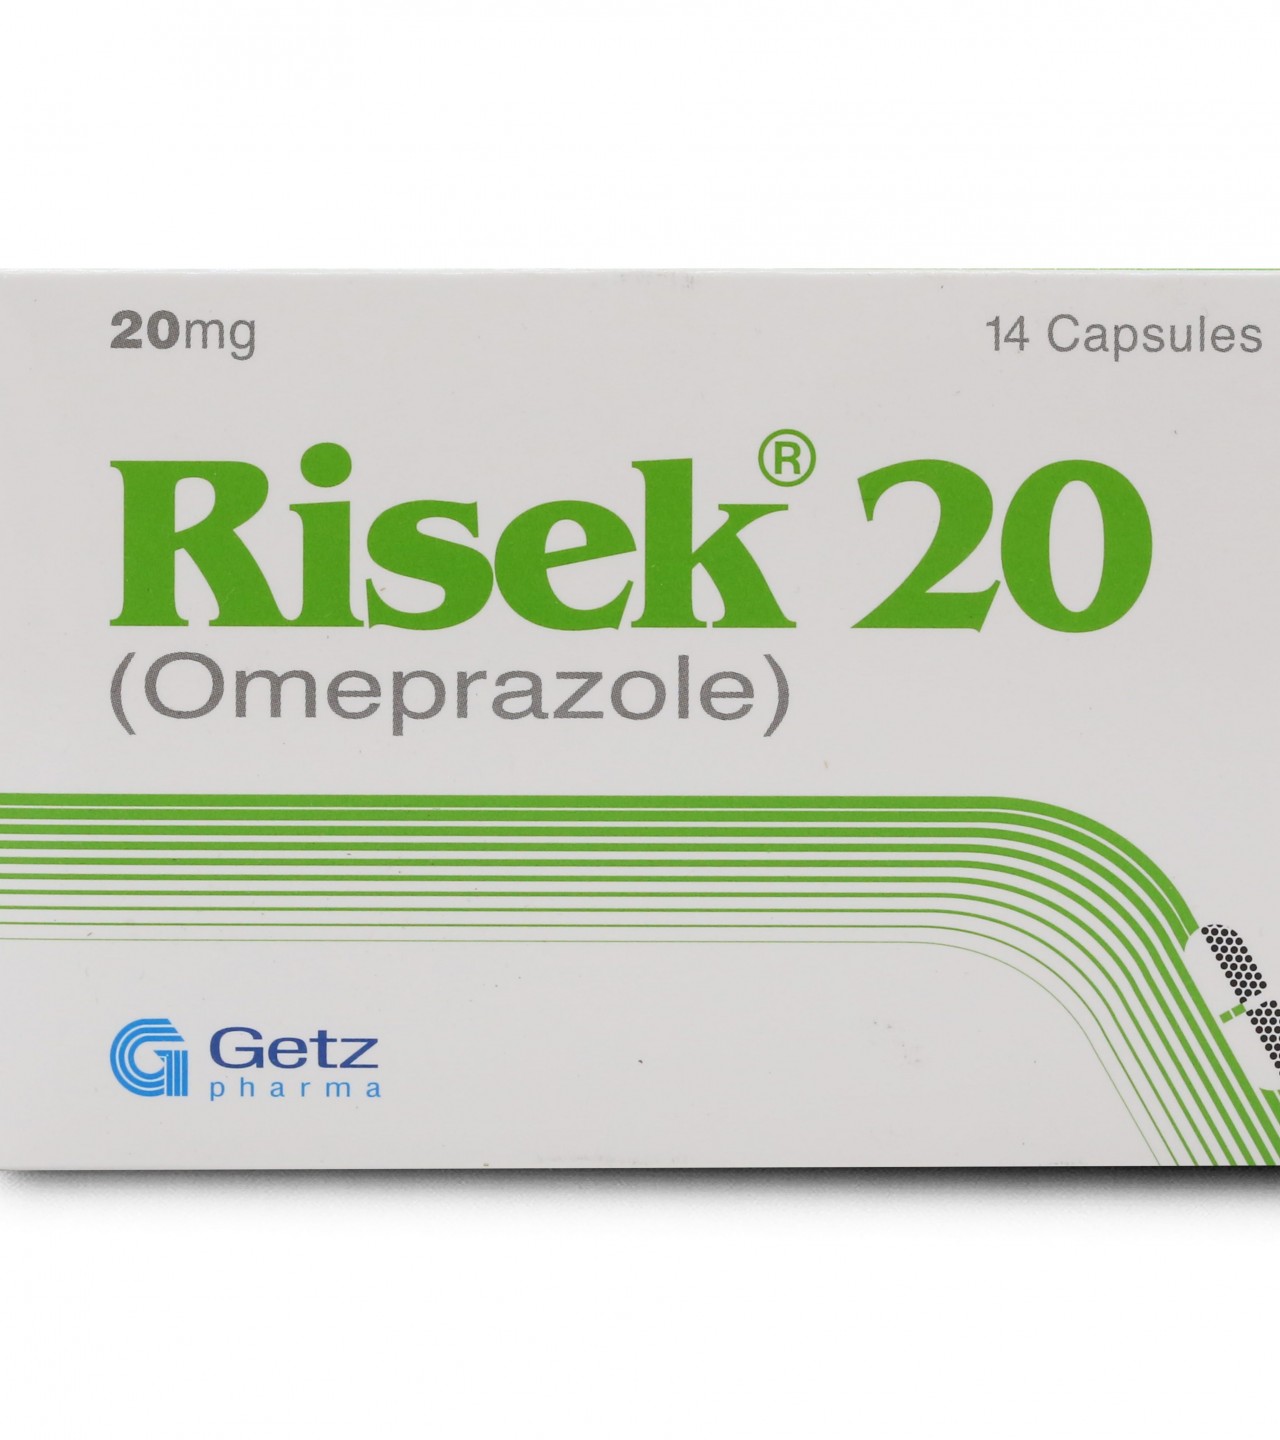 Risek 20mg Capsules for heartburn and indigestion